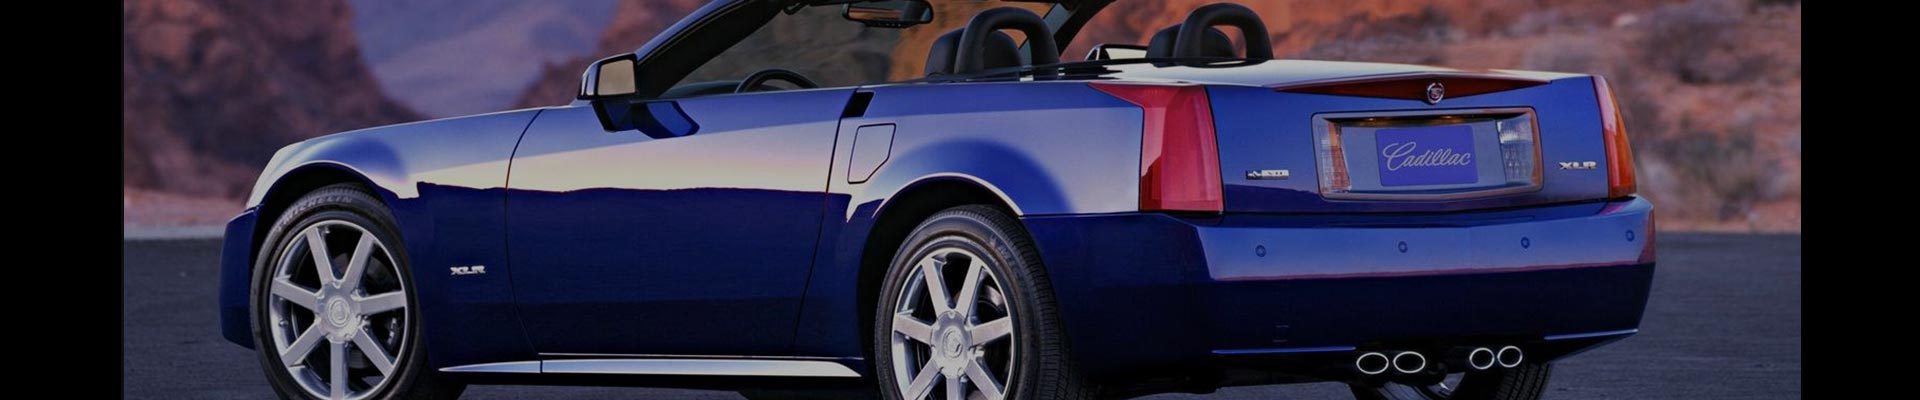 Shop Replacement and OEM 2004 Cadillac XLR Parts with Discounted Price on the Net